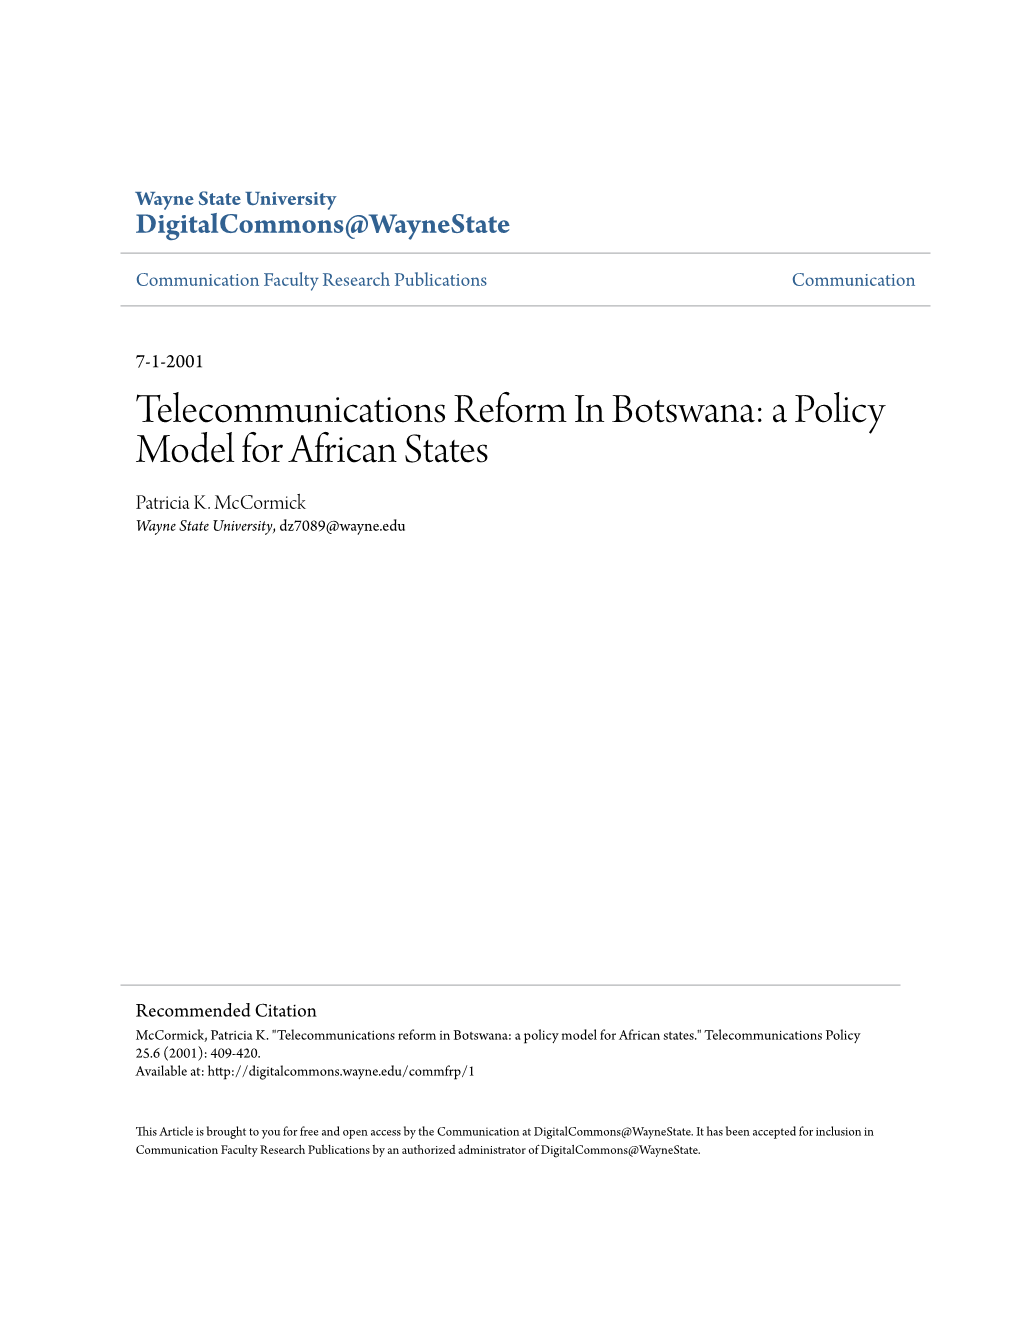 Telecommunications Reform in Botswana: a Policy Model for African States Patricia K